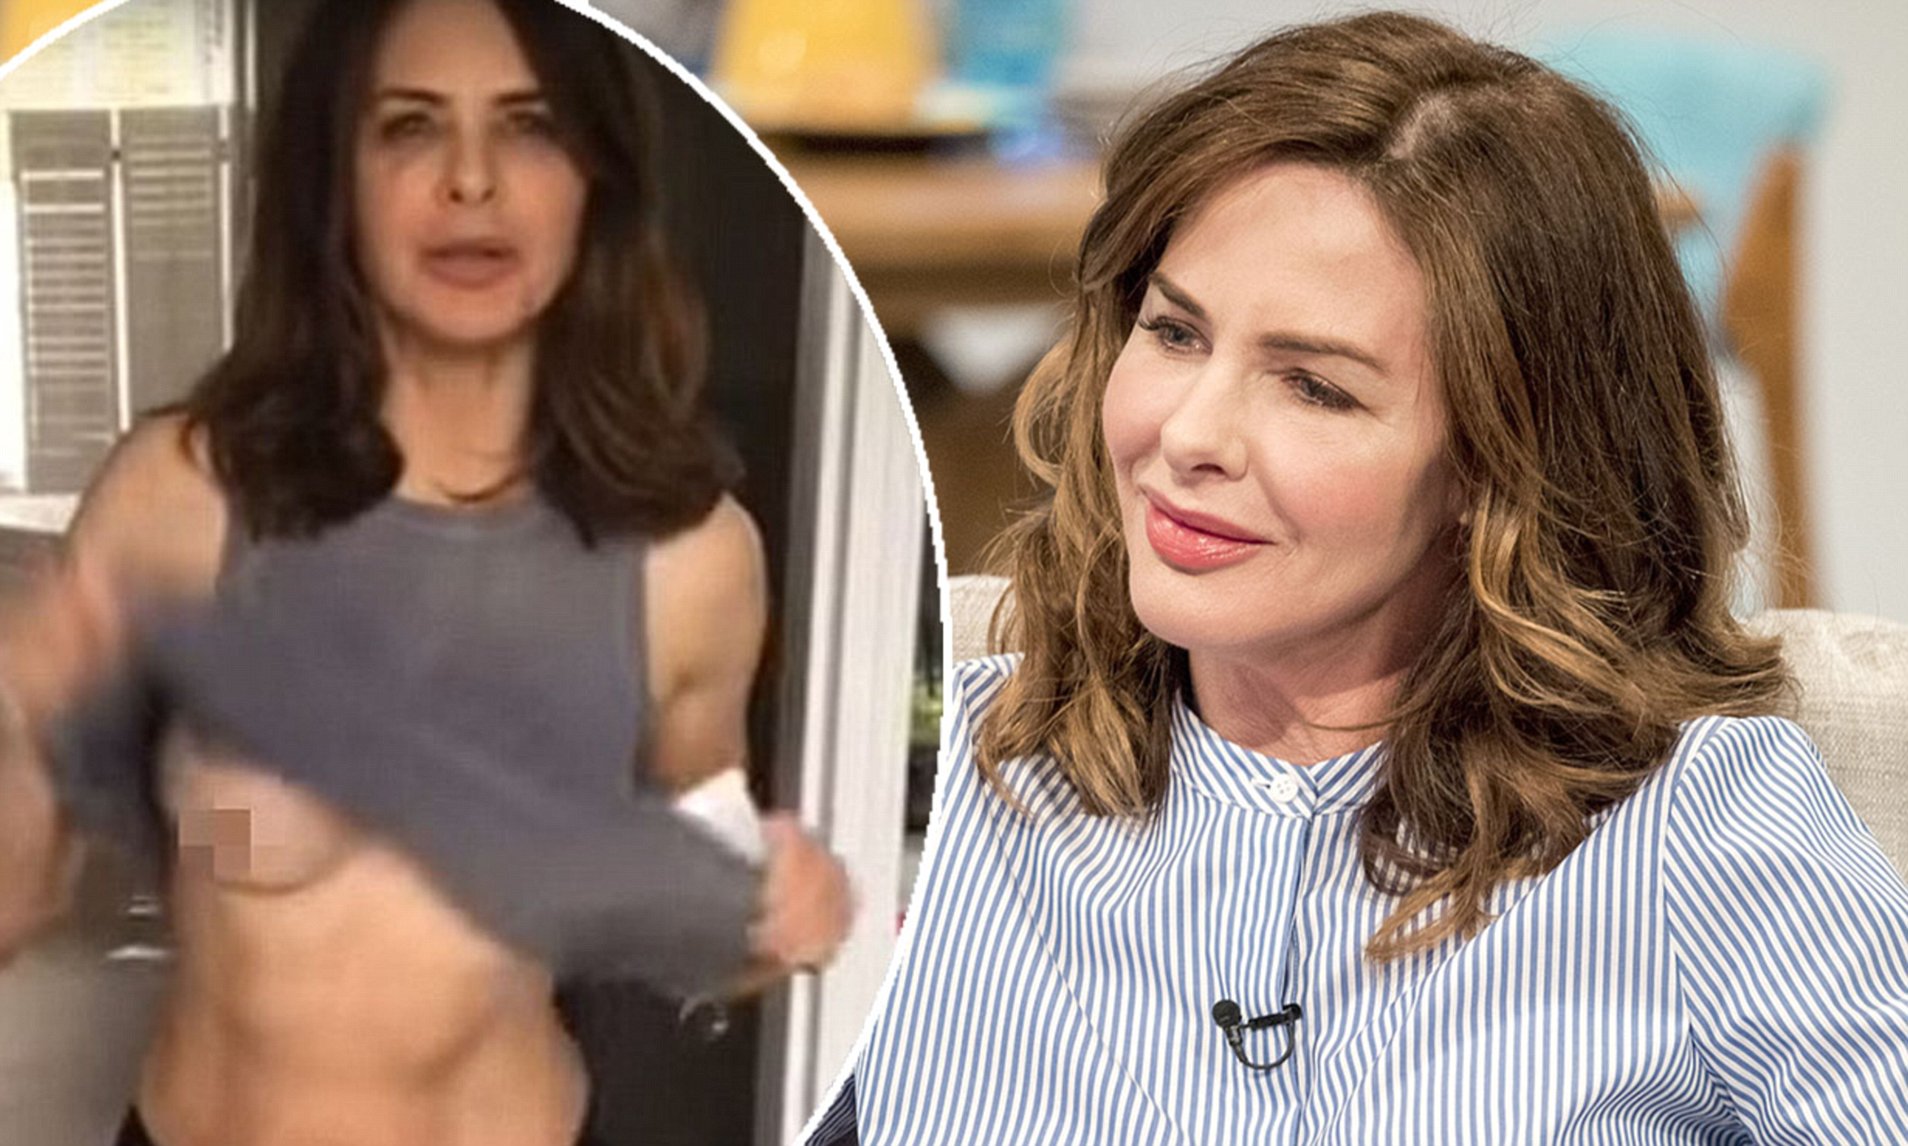 charlo charles recommends Trinny Woodall Boob Flash